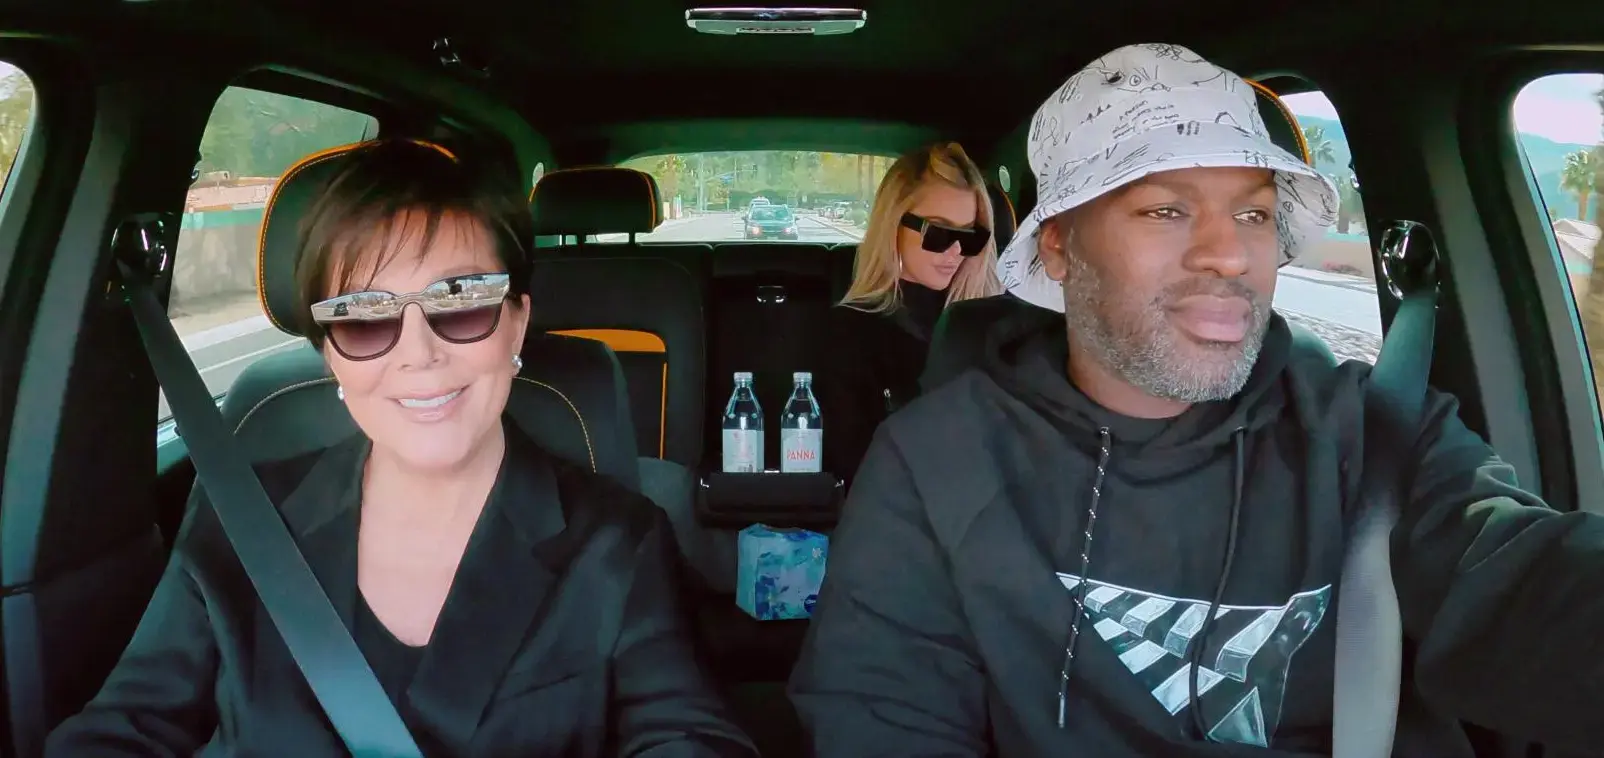 Kris, Khloe, and Corey in a car together on The Kardashians